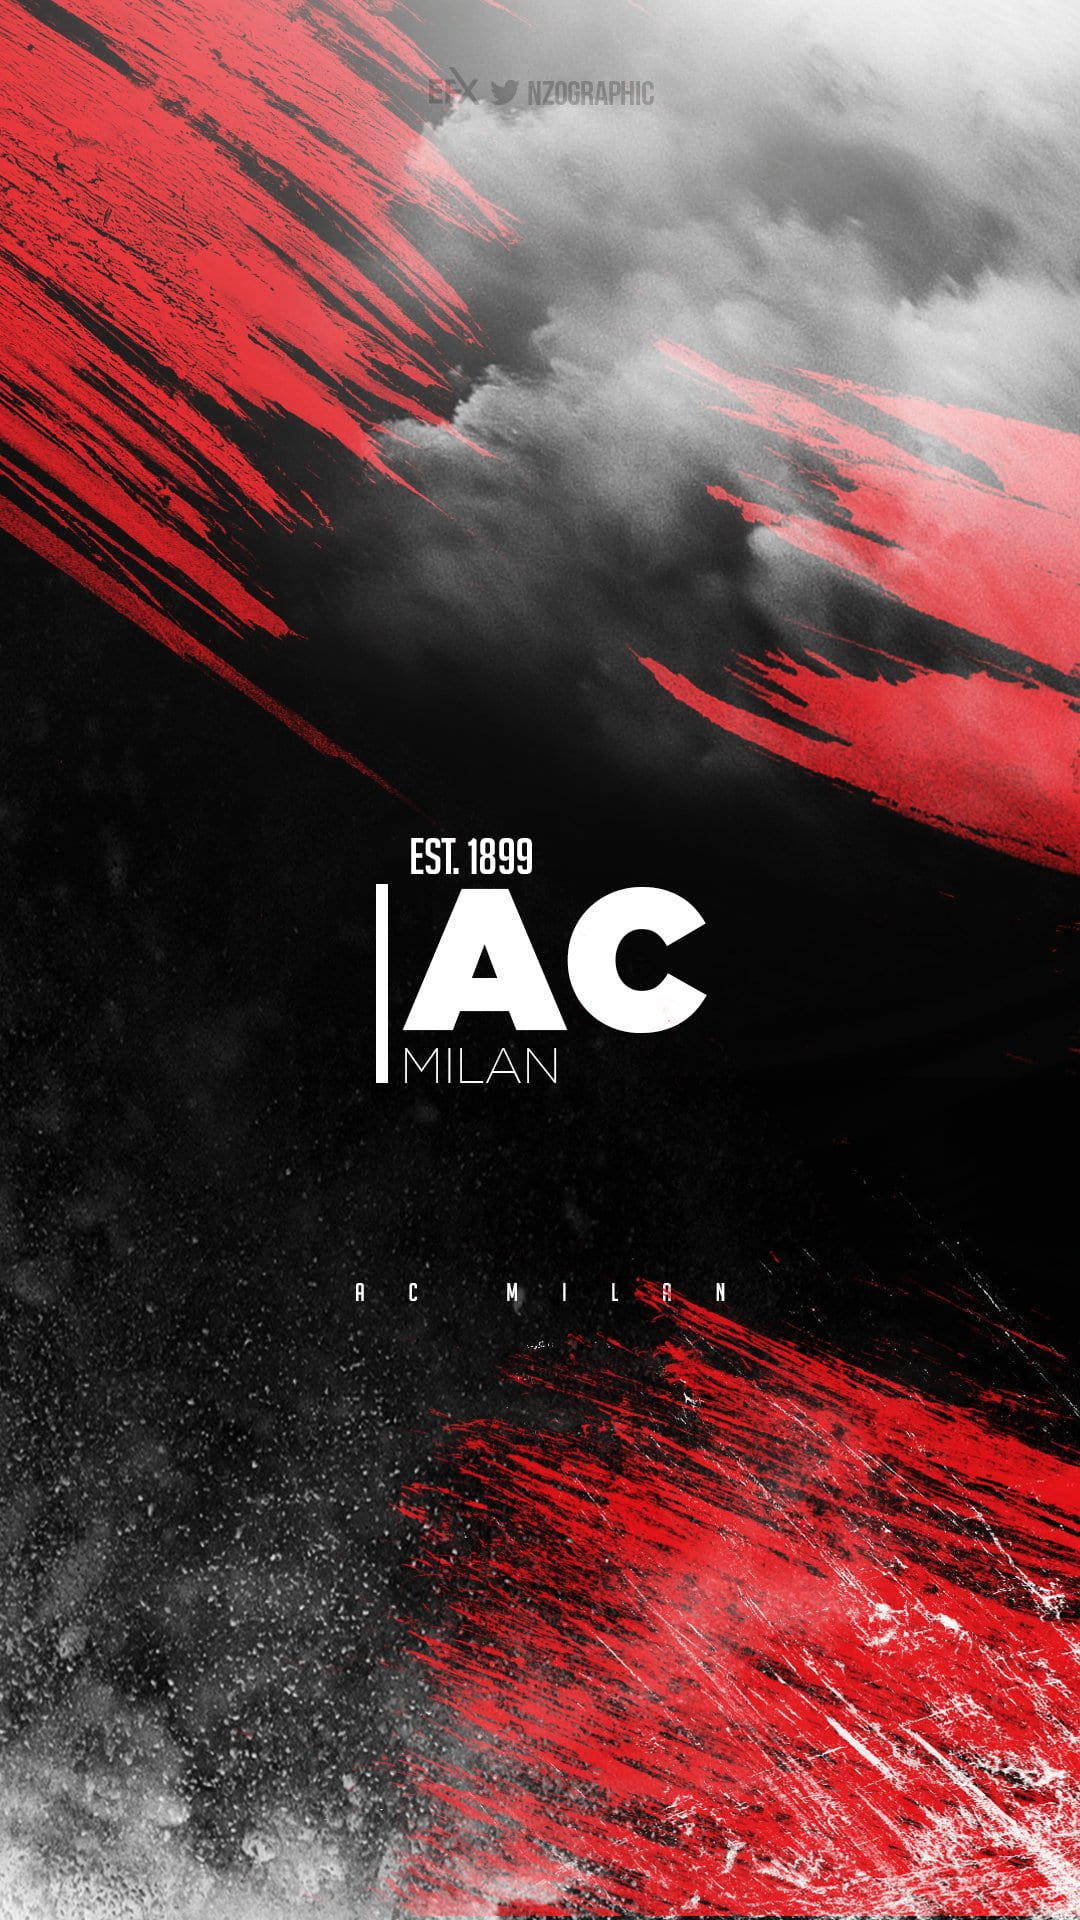 AC Milan 4k, AC Milan Wallpapers, AC Milan Wallpapers 4k, Iphone, wallpapers iPhone, wallpapers Laptop - AC Milan Elegance: 4K Wallpapers to Grace Your Device